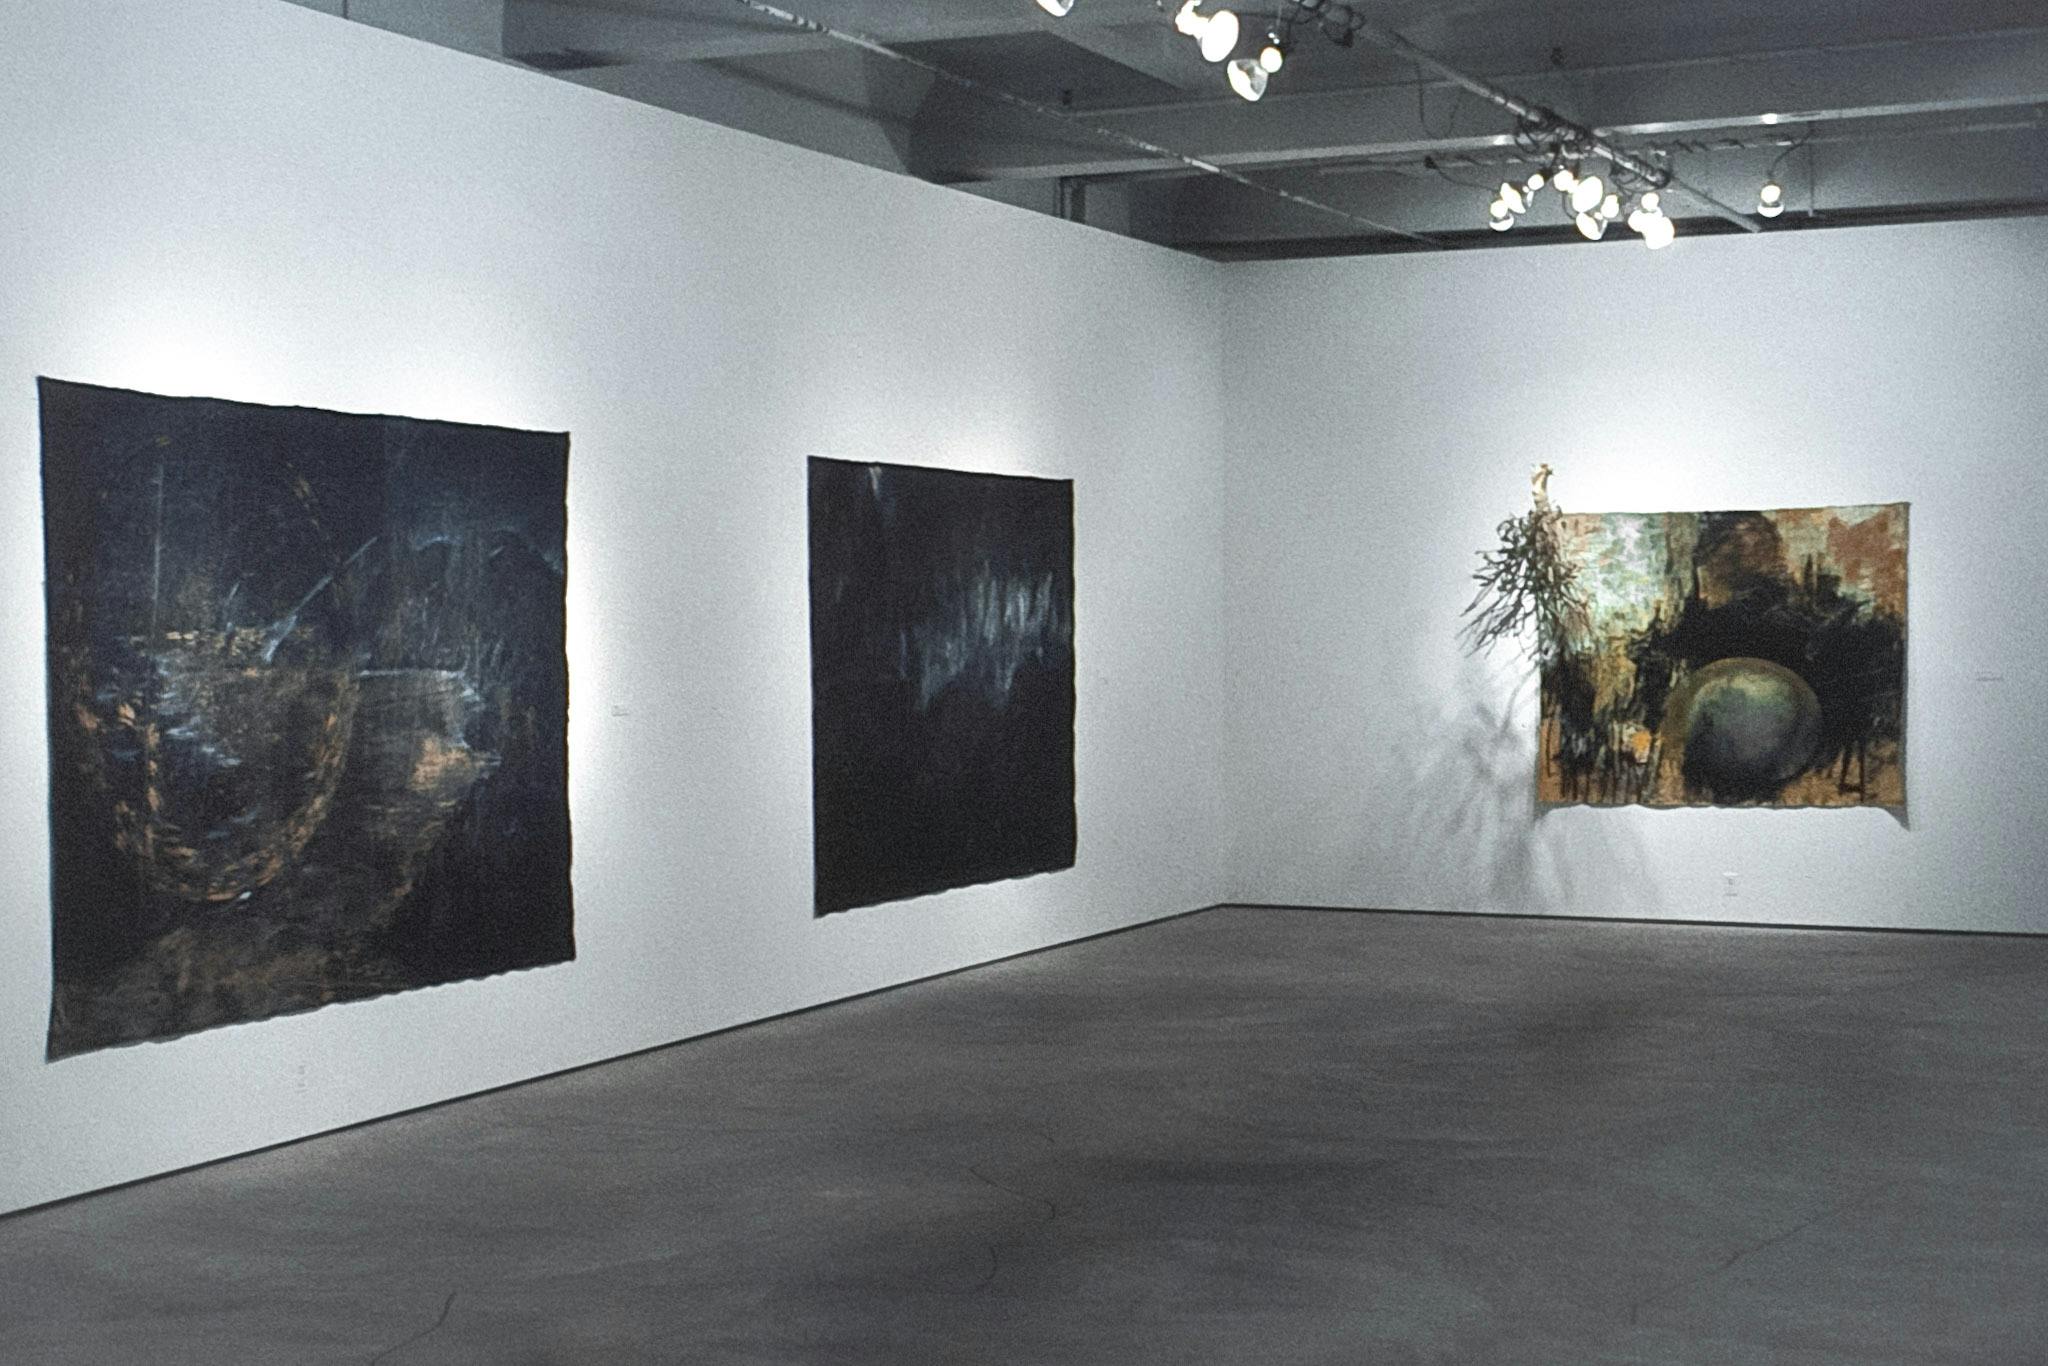 Three large works in the corner of a gallery space. The works are dark paintings on unstretched canvas resembling light leaks on film. One work in the corner also had a large branch attached to it.